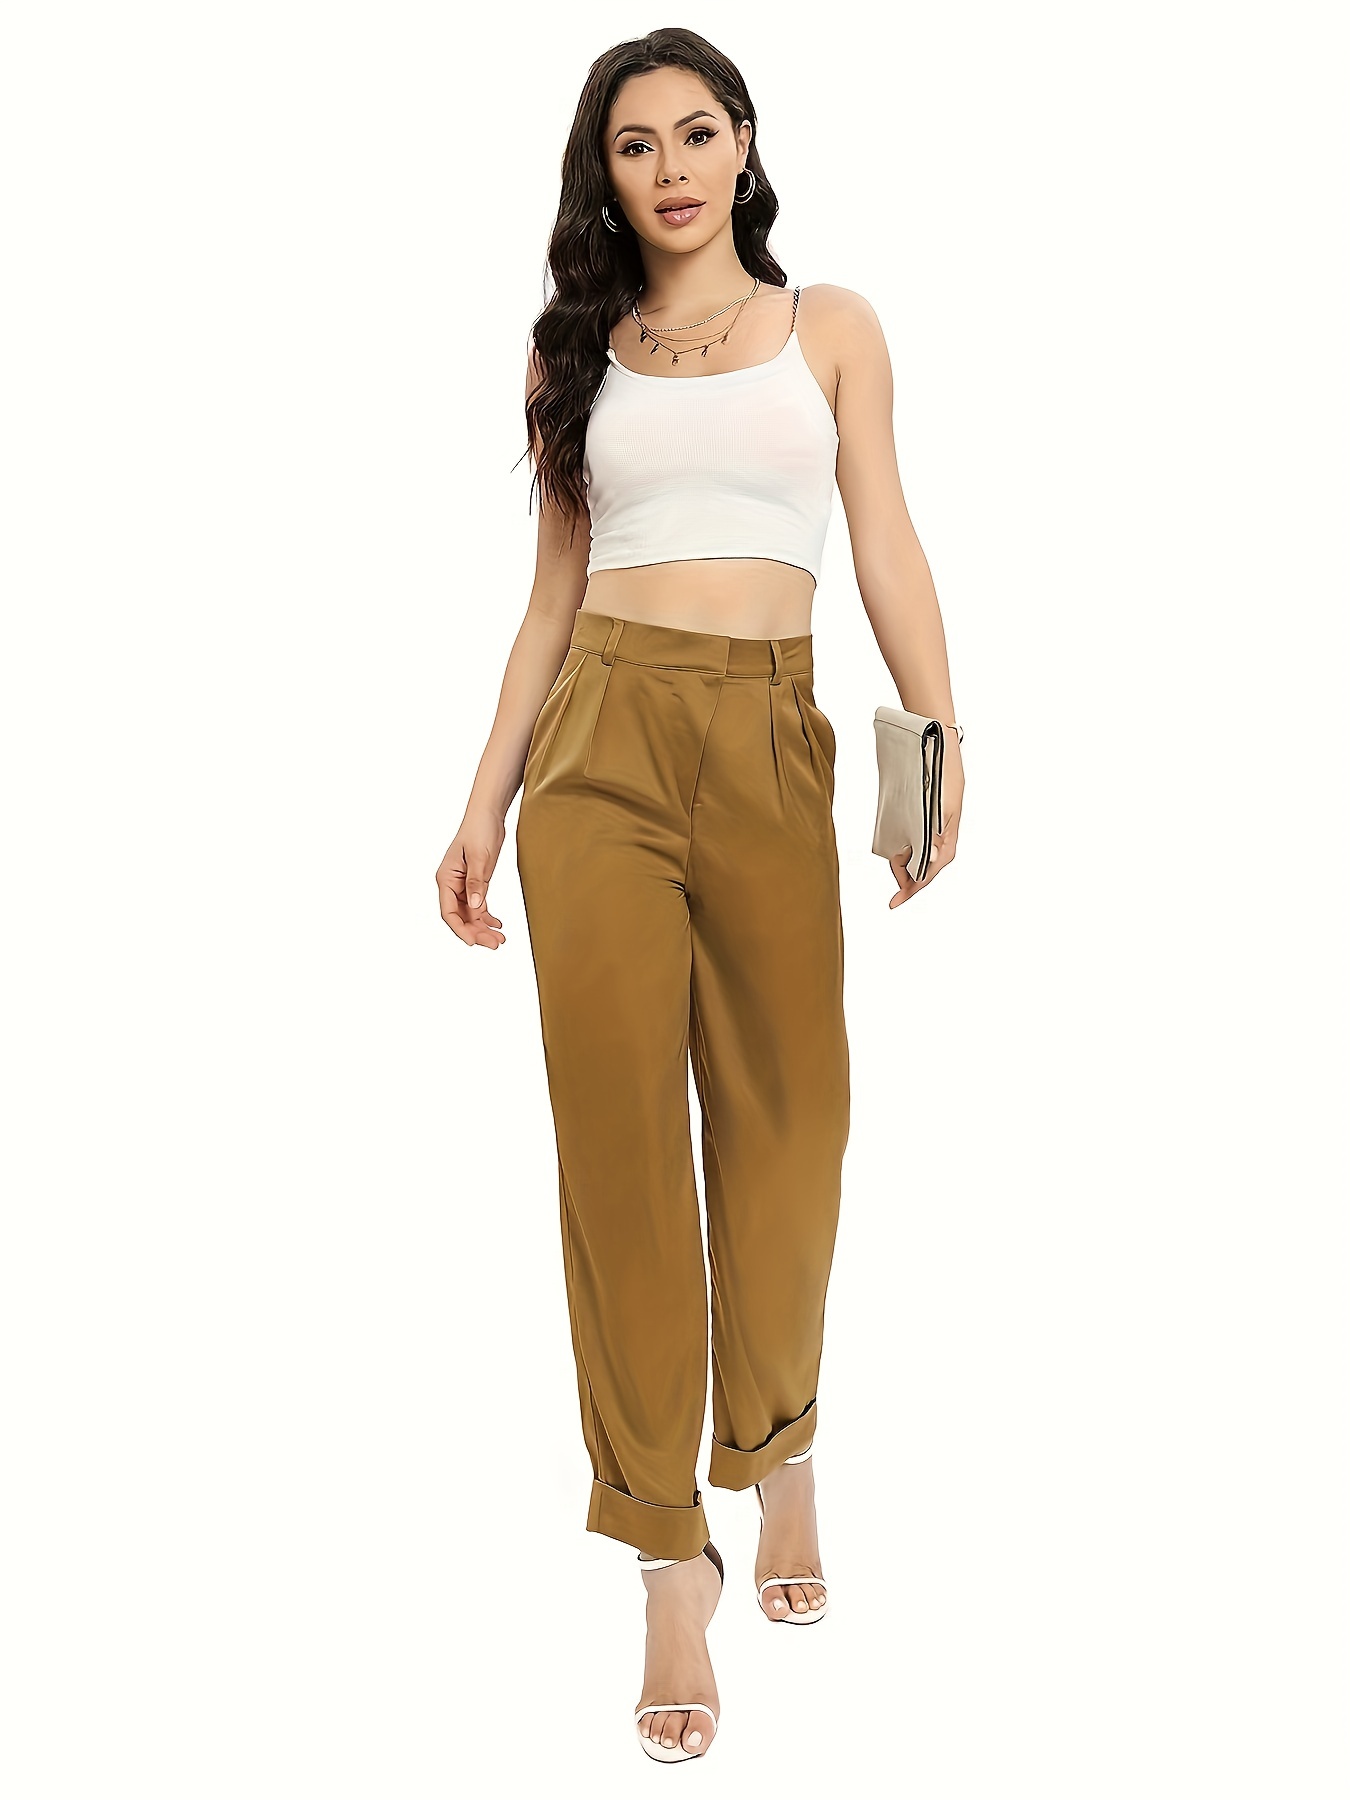 Female Pants Spring Straight Trousers Suits Formal Casual S-XL Women's Pants